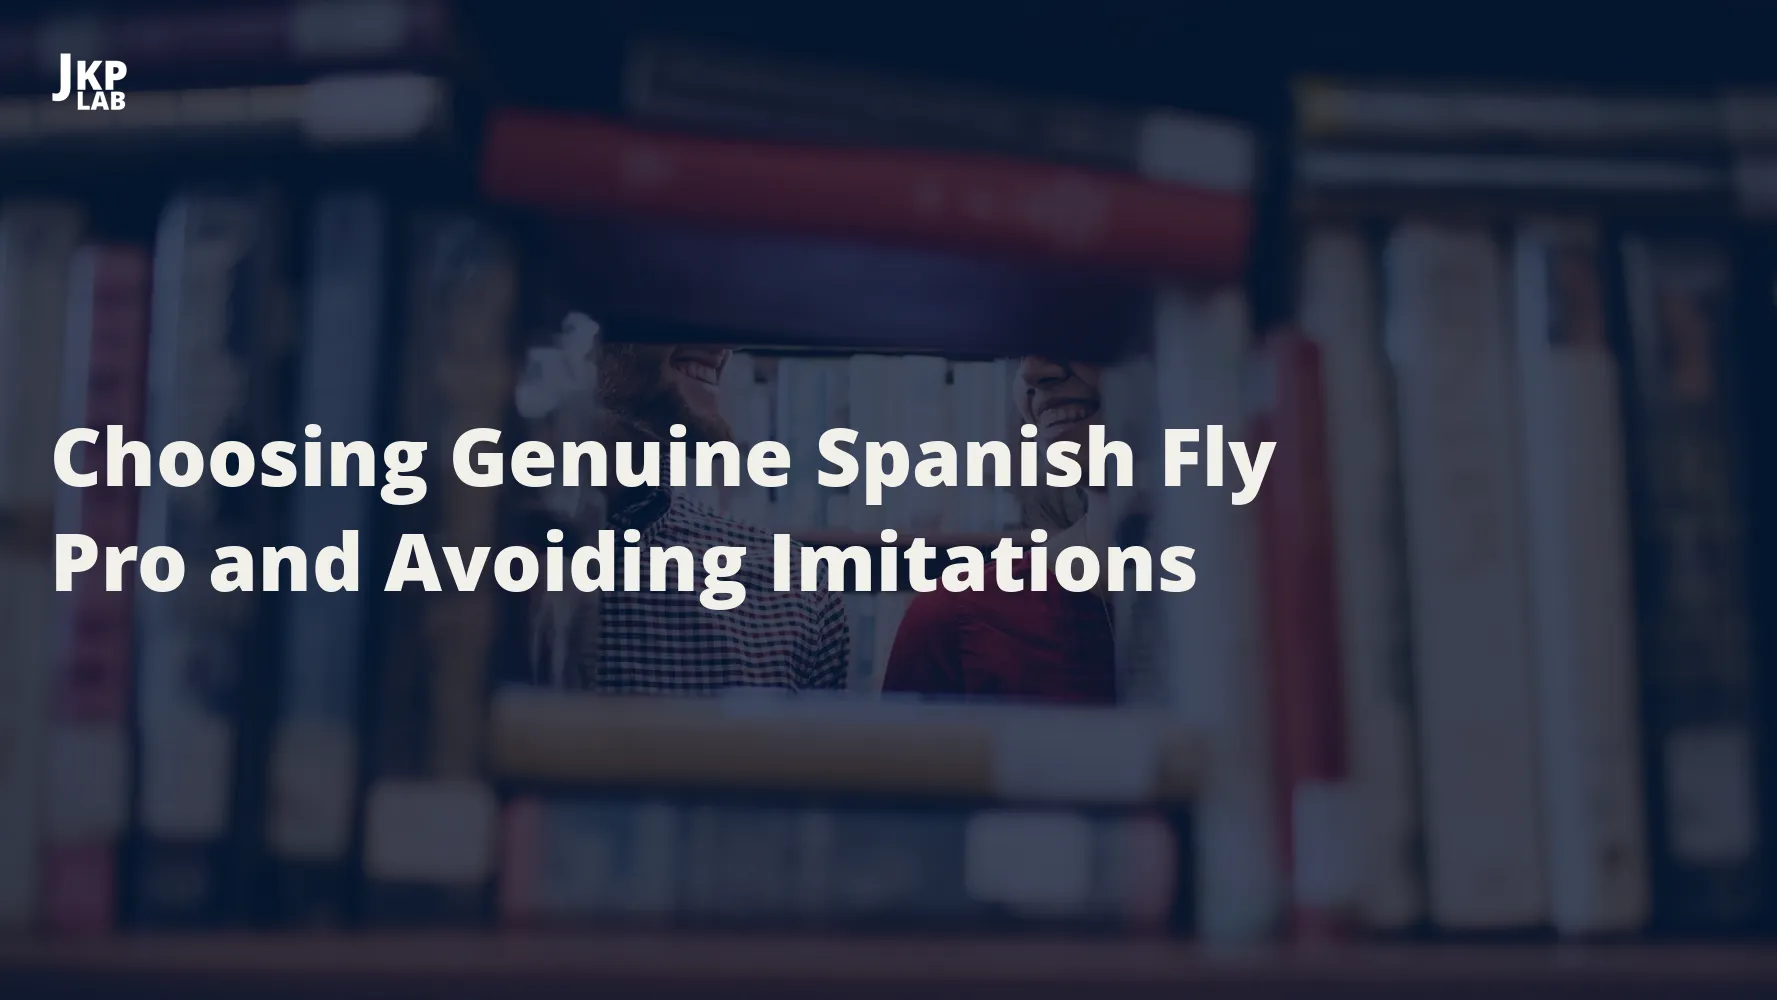 Counterfeit Spanish Fly: How to Spot Fake Products